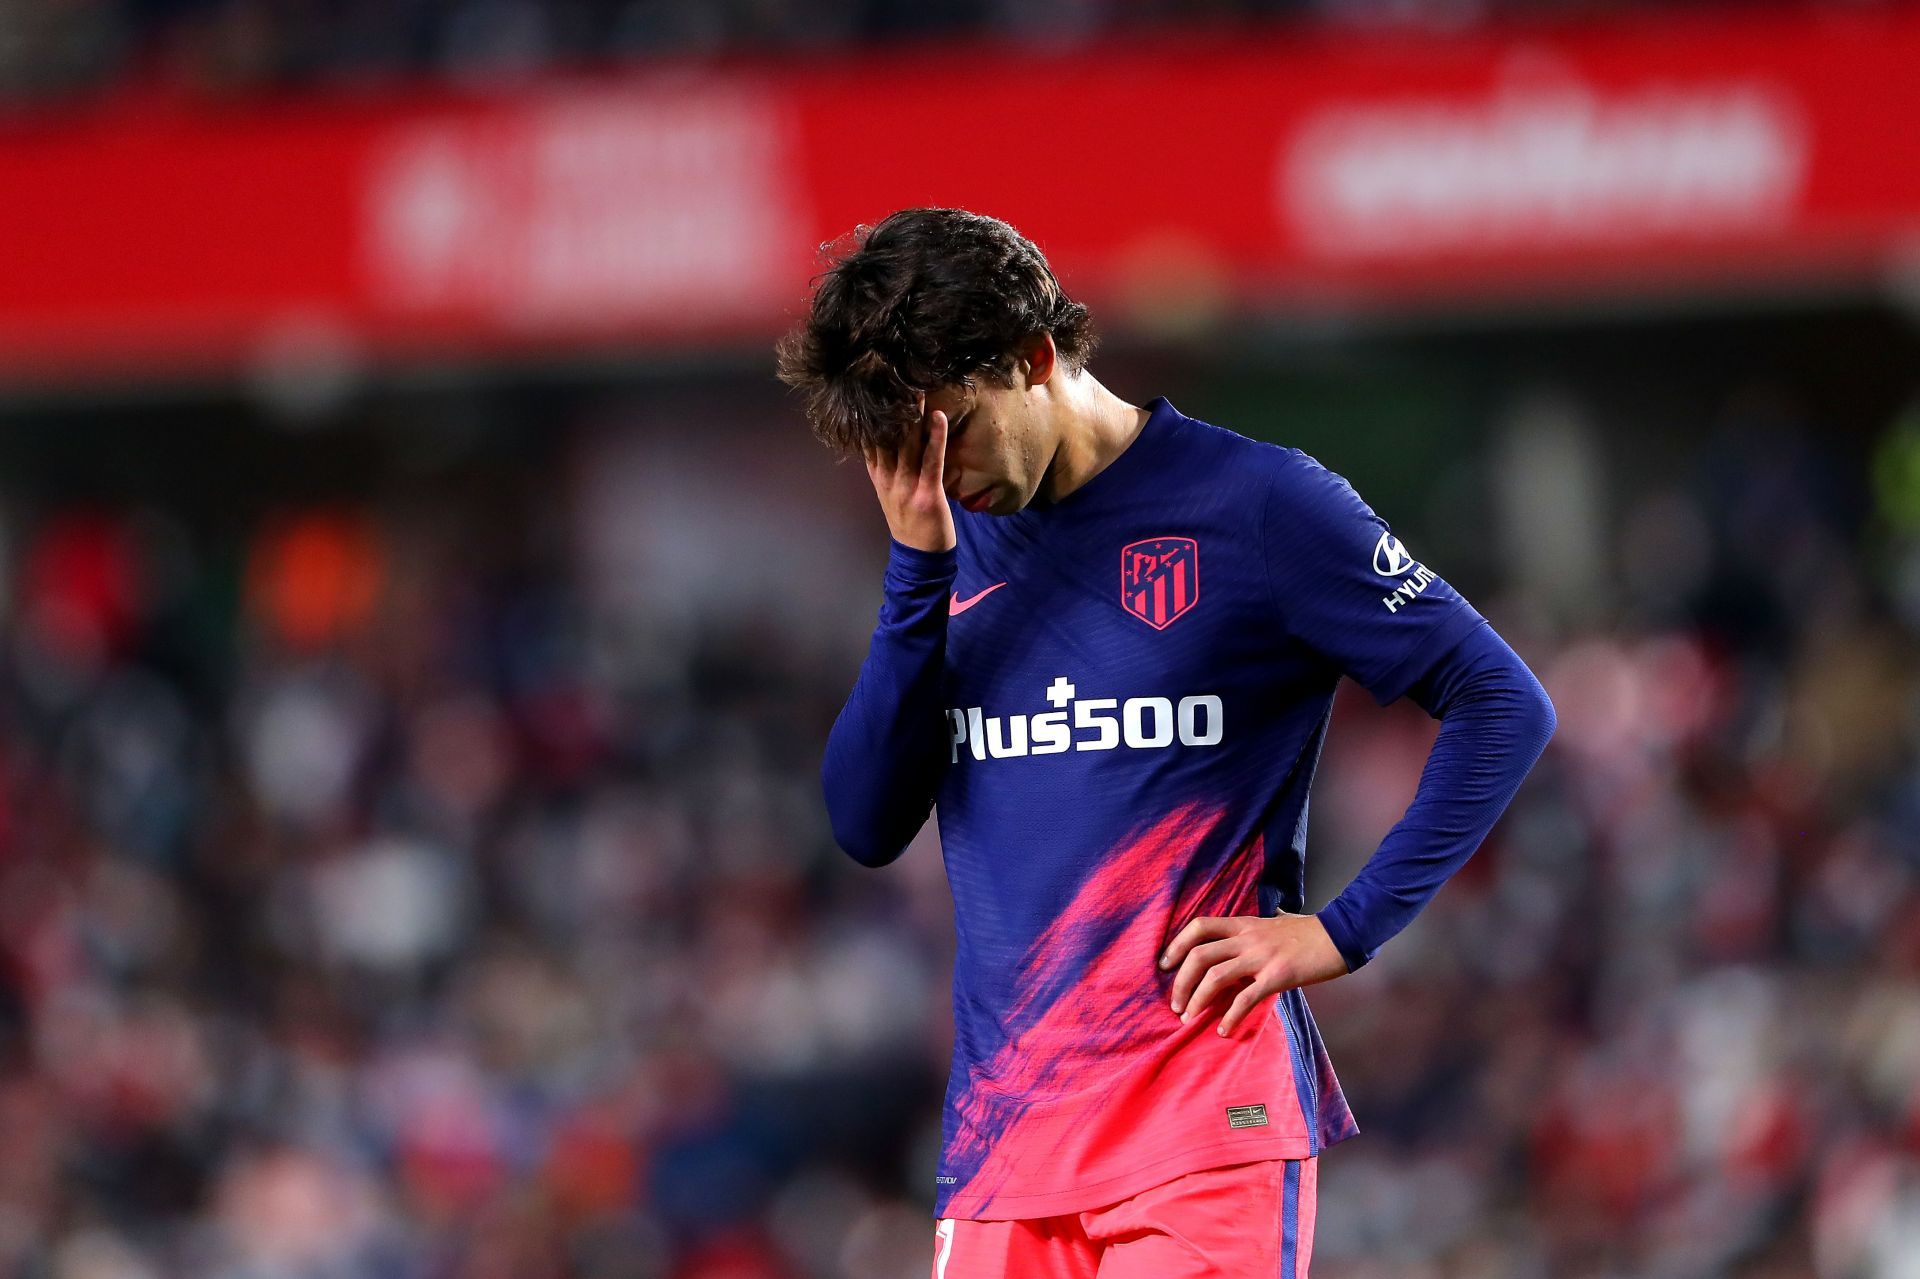  Joao Felix has fallen out of favour under Diego SImeone at Atletico Madrid